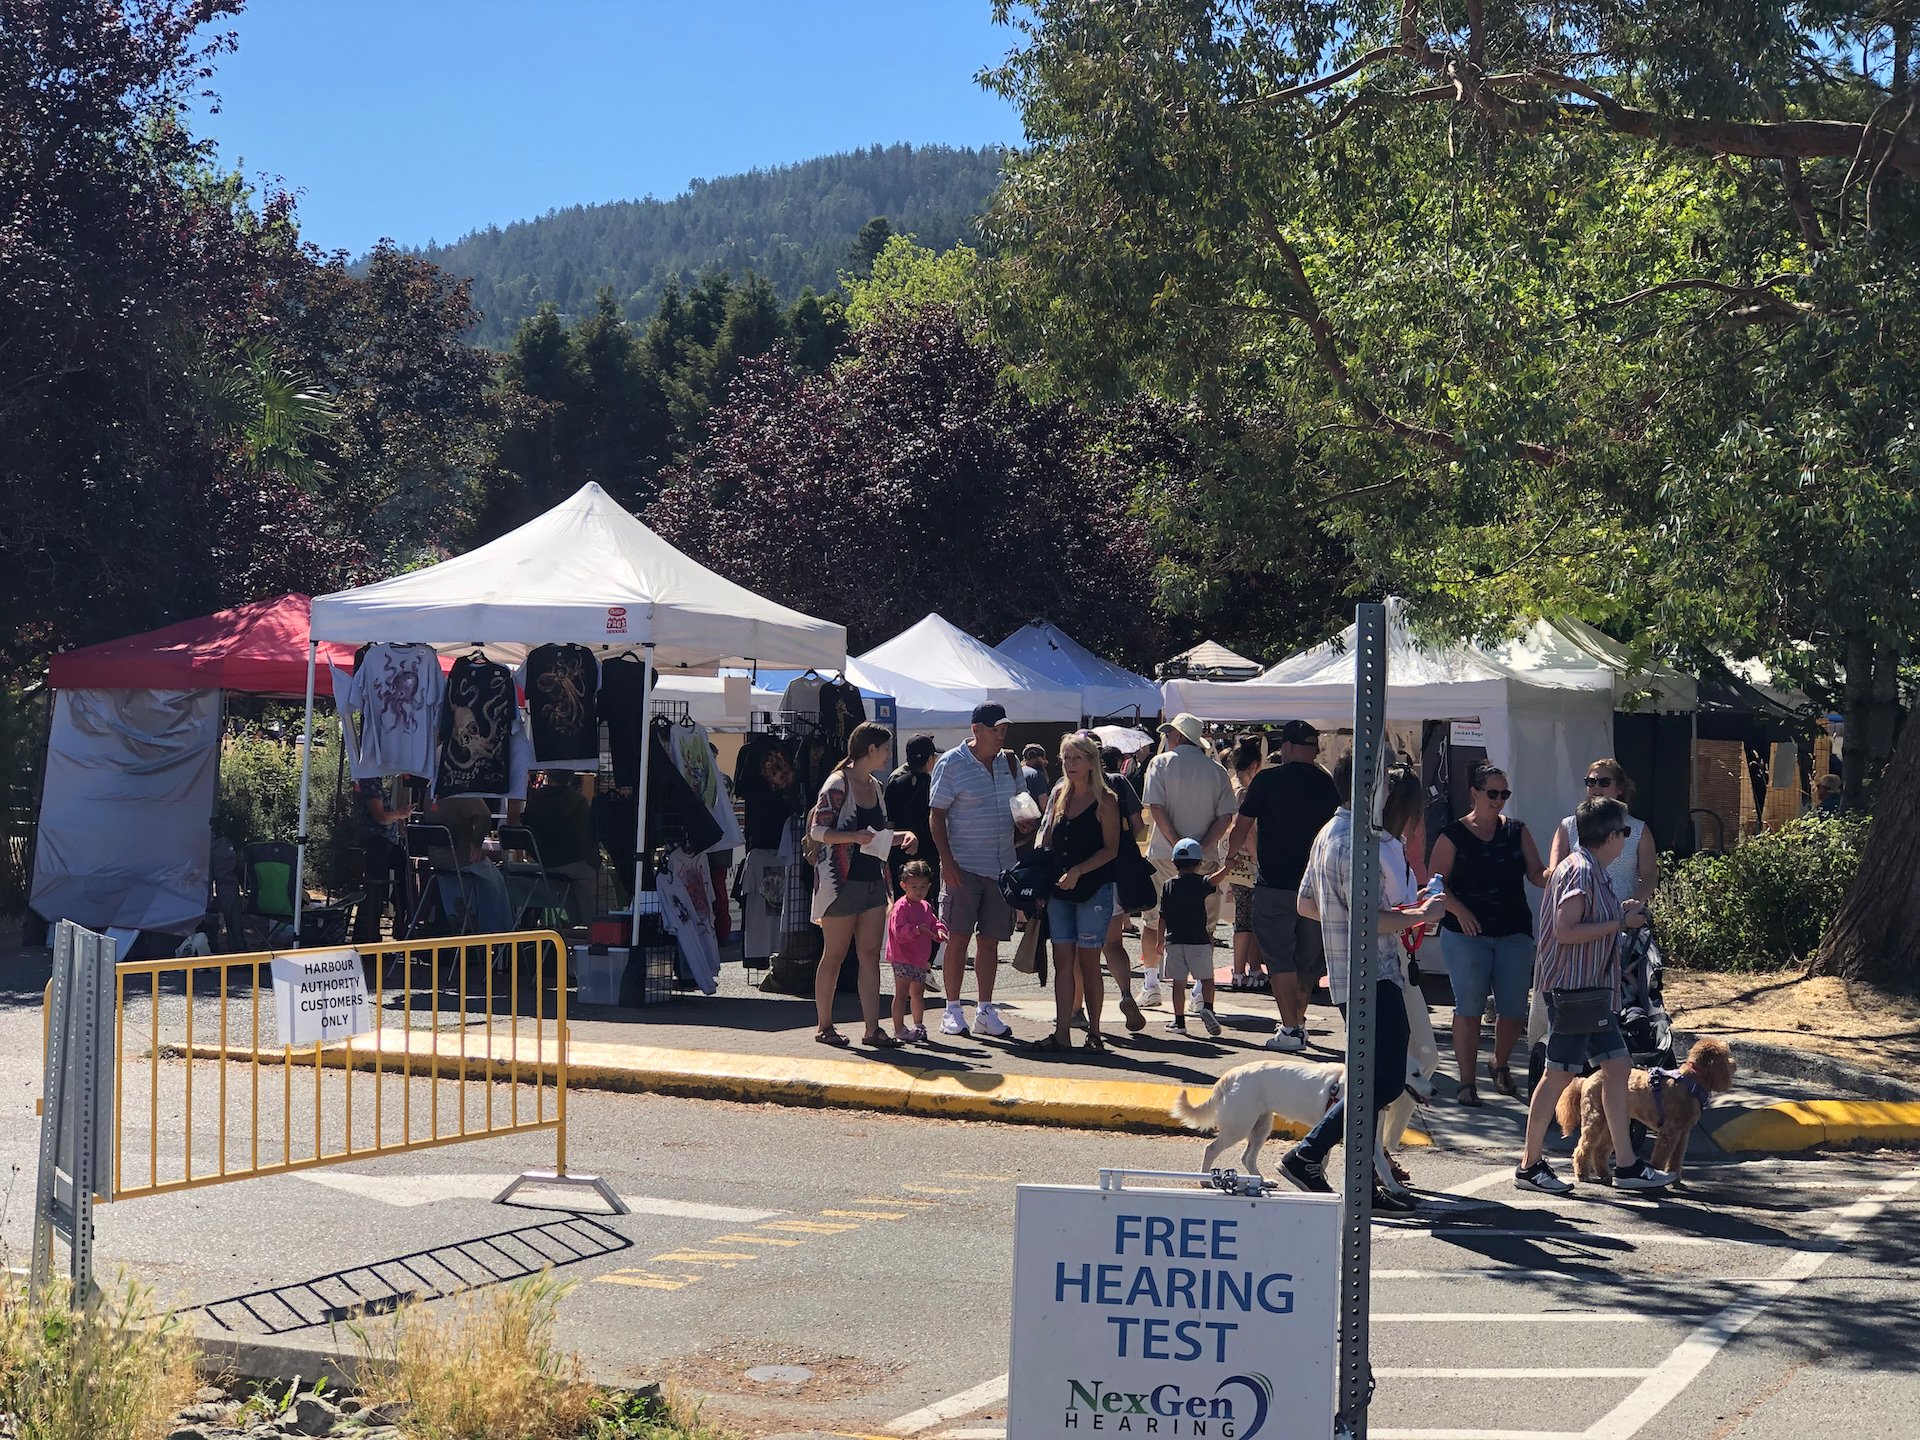  The market is quite a bit larger than the one on Galiano, with lots of craft vendors as well as a lot of farmer’s stalls. The produce looked amazing.  